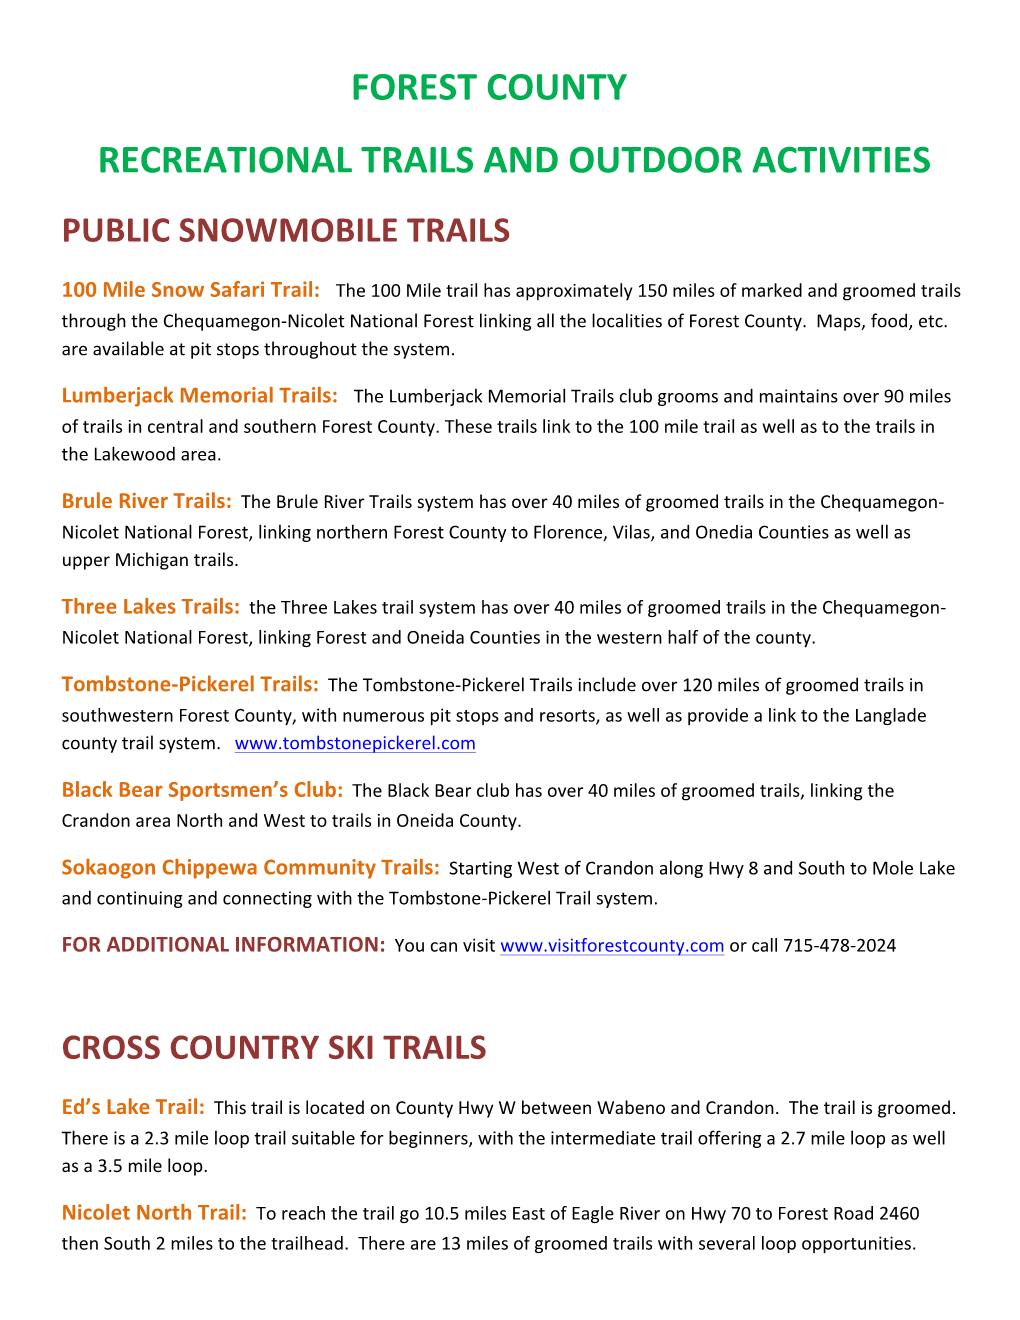 Recreational Trails and Outdoor Activities Public Snowmobile Trails